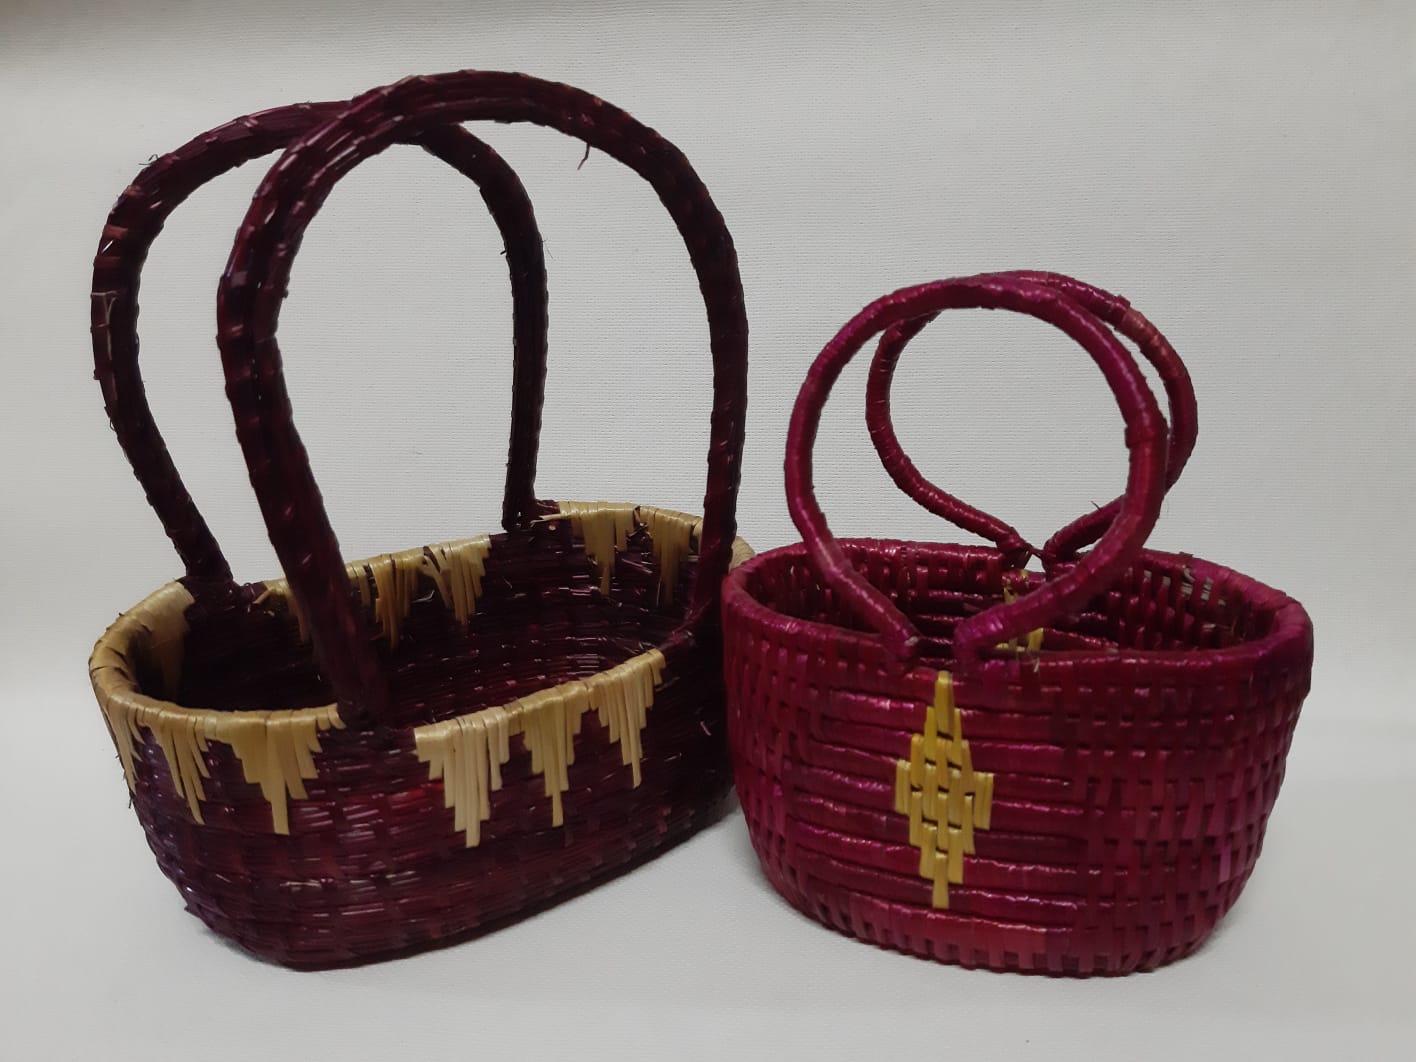 fruit basket made from sikki